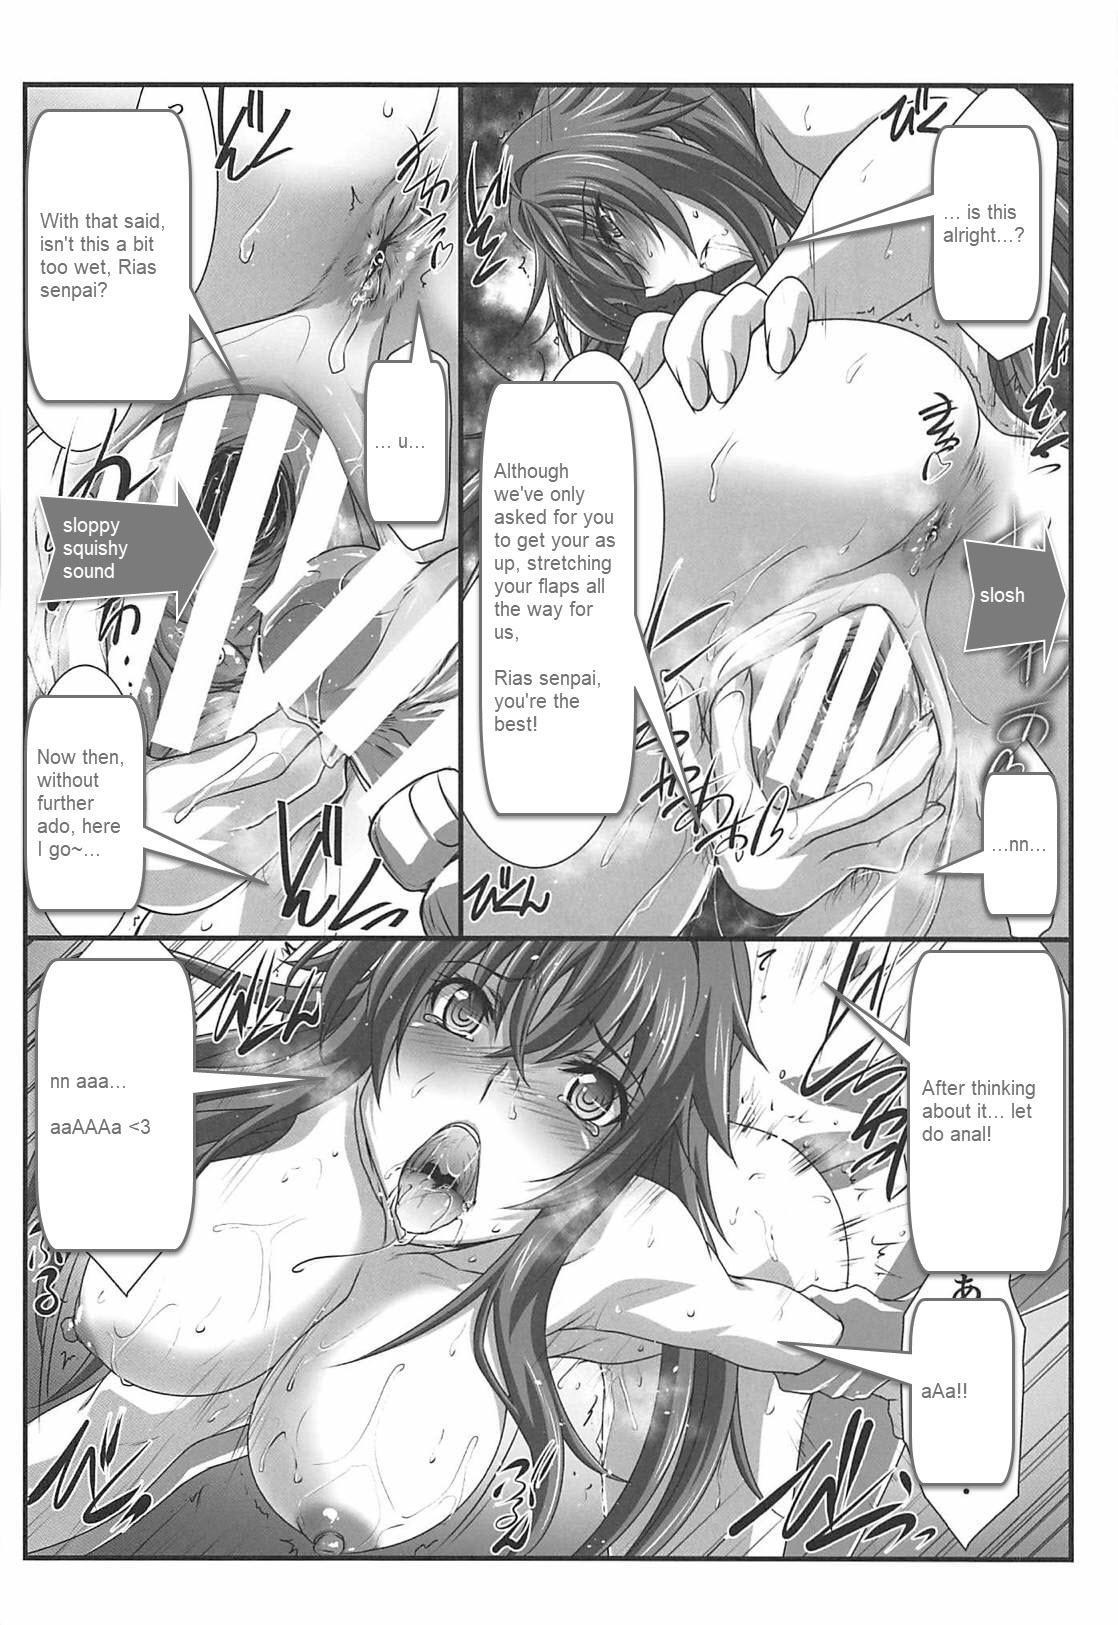 Van SPIRAL ZONE DxD II - Highschool dxd Massages - Page 11